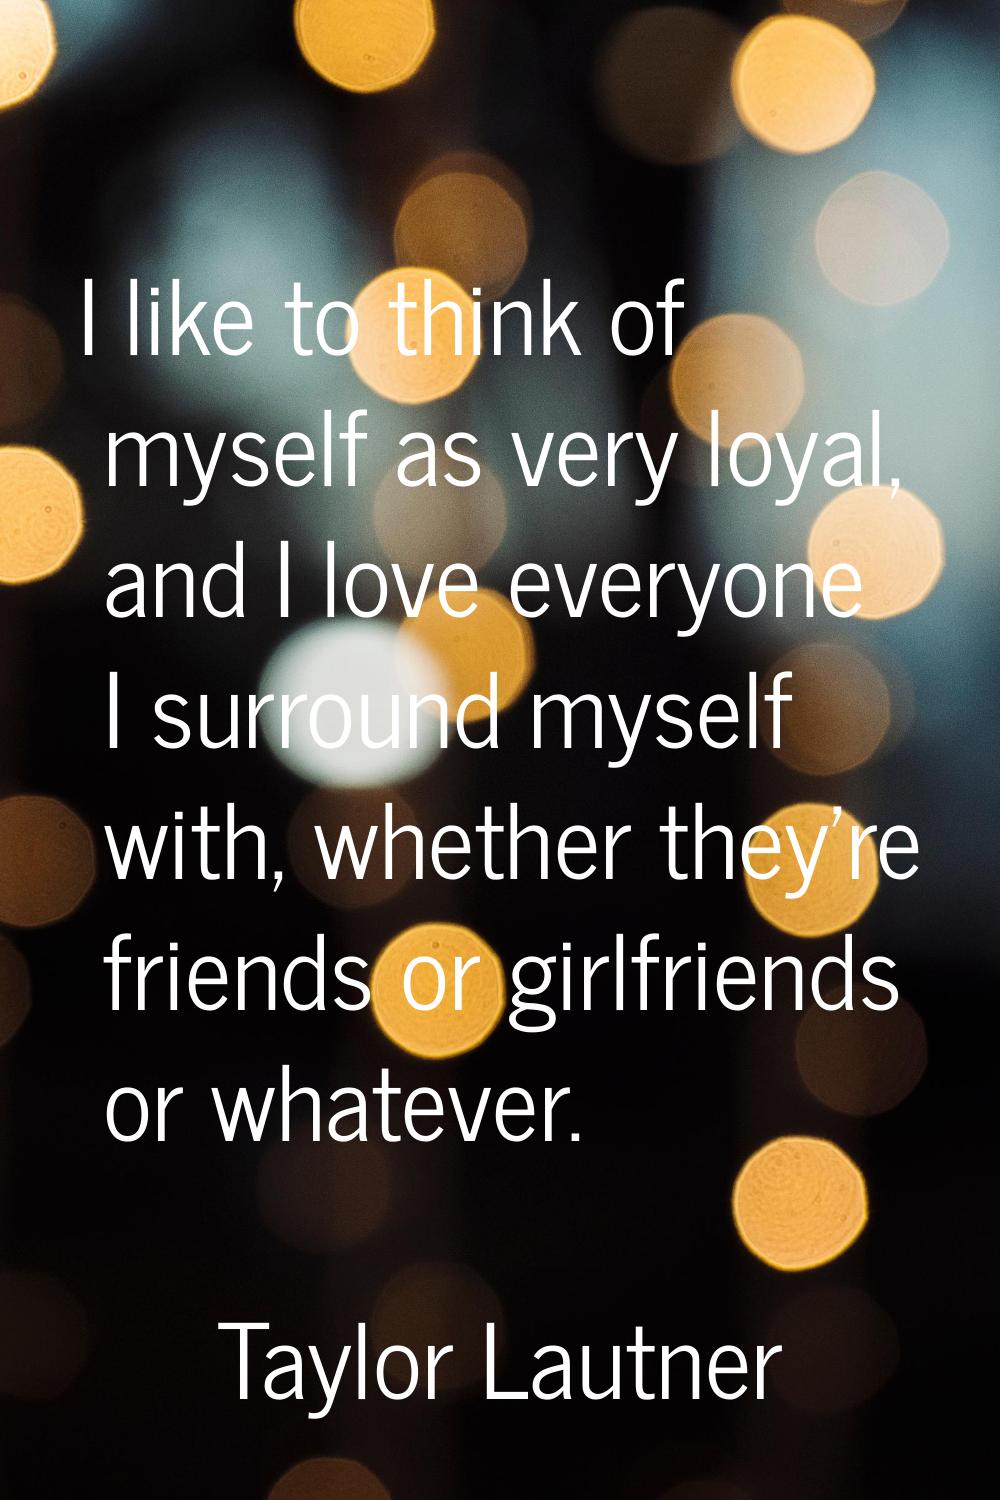 I like to think of myself as very loyal, and I love everyone I surround myself with, whether they'r